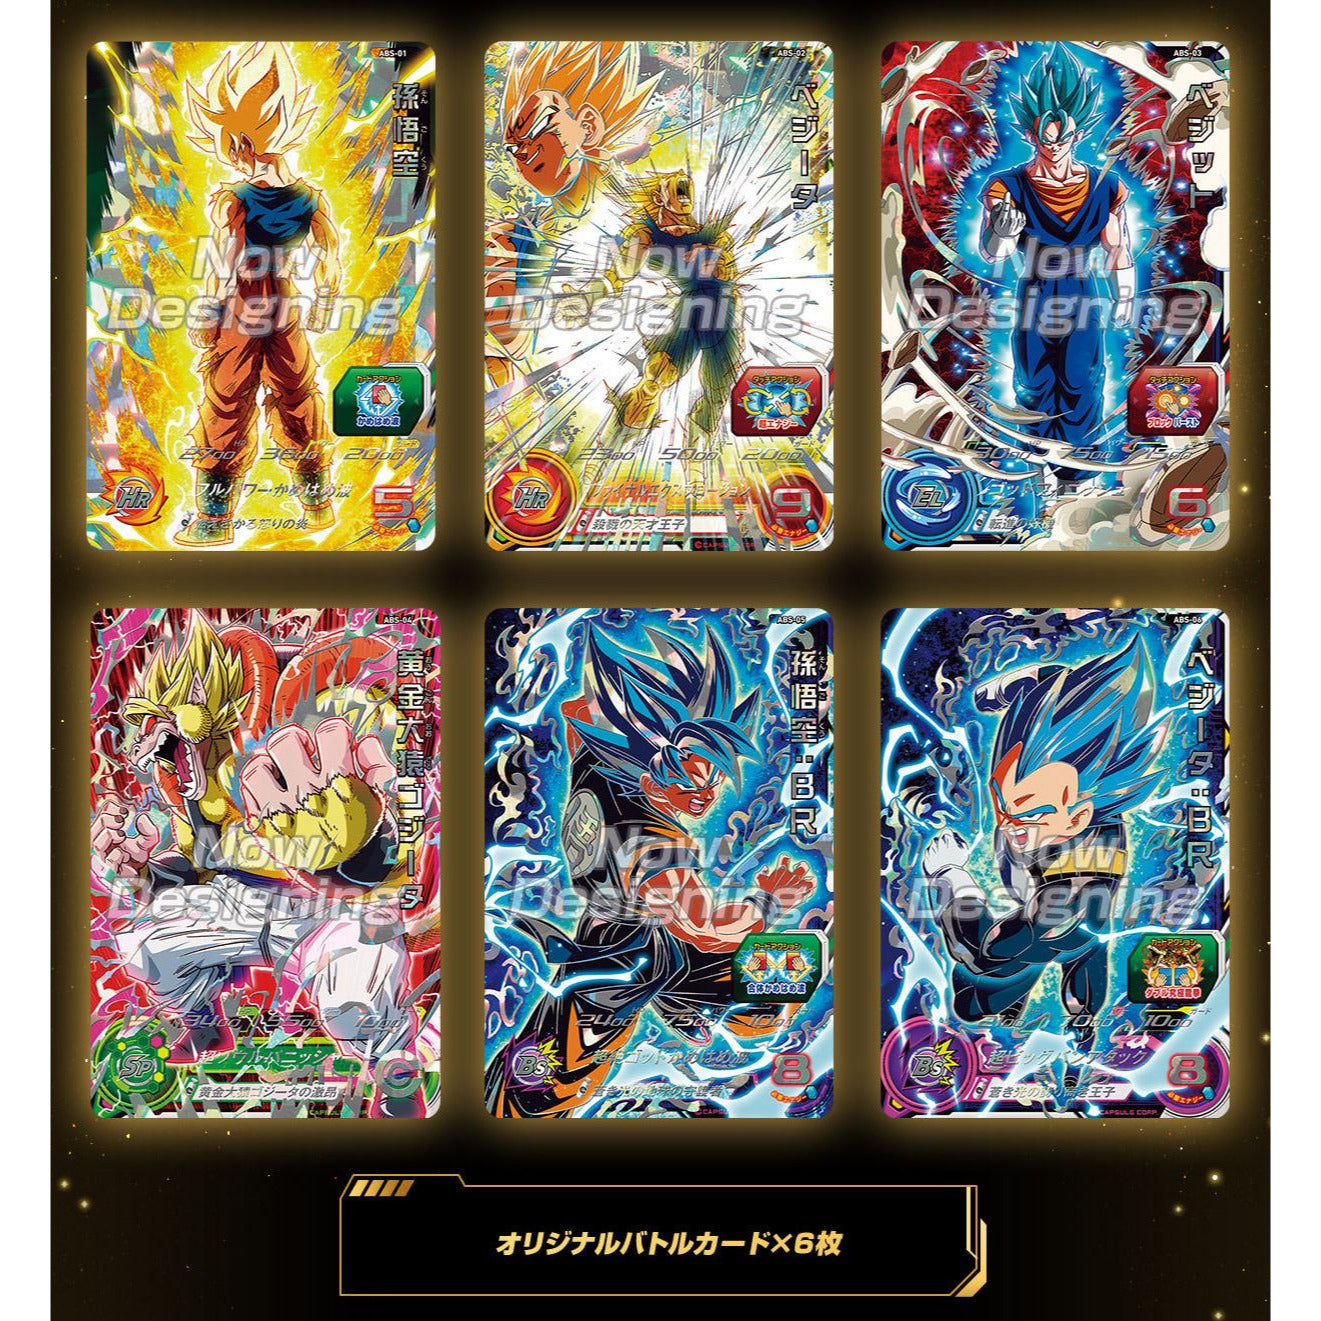 Super Dragon Ball Heroes: 10th ANNIVERSARY SPECIAL SET